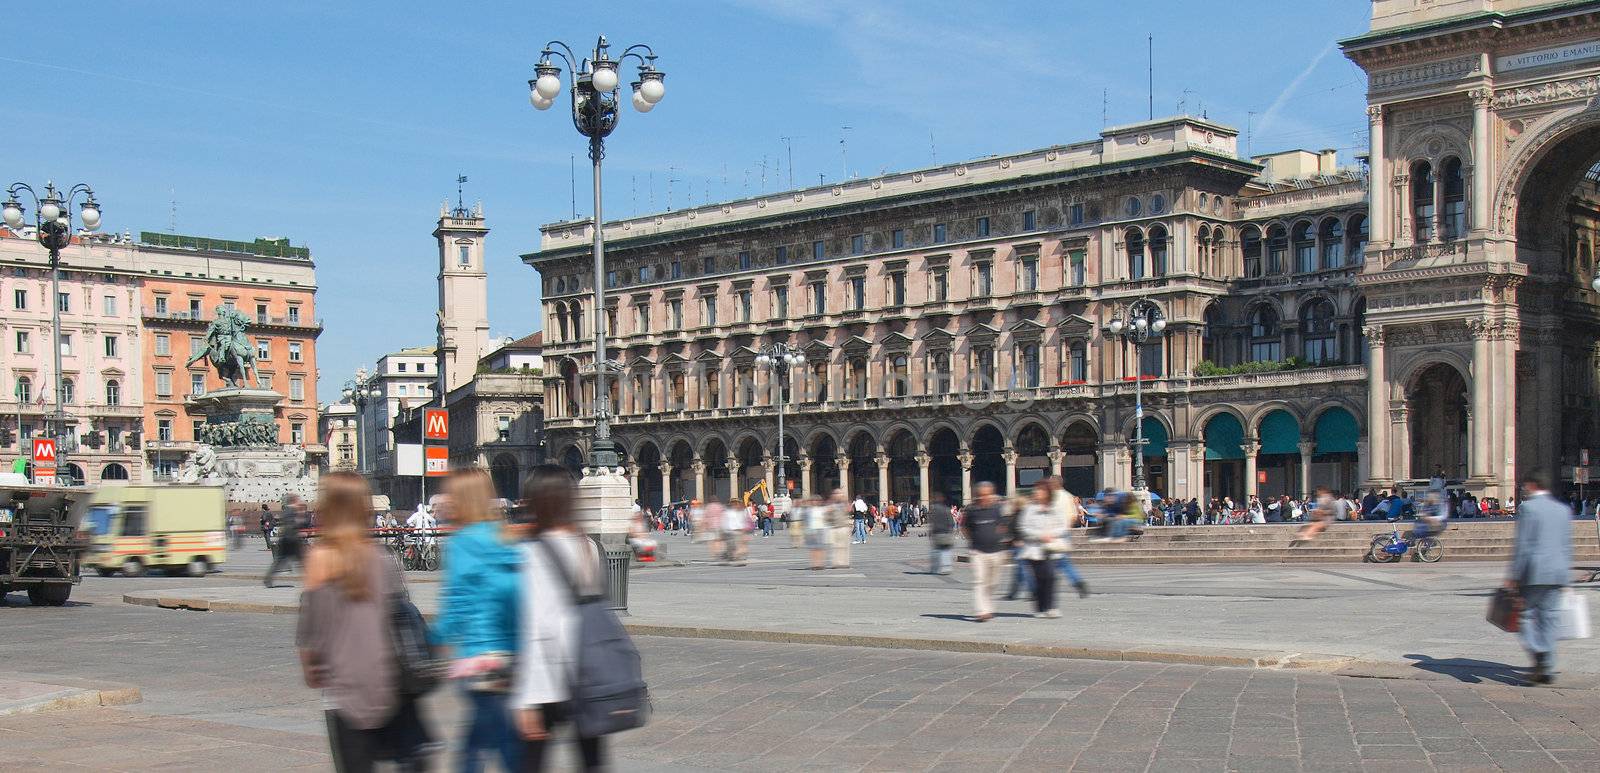 The Piazza Duomo square in Milan, Italy